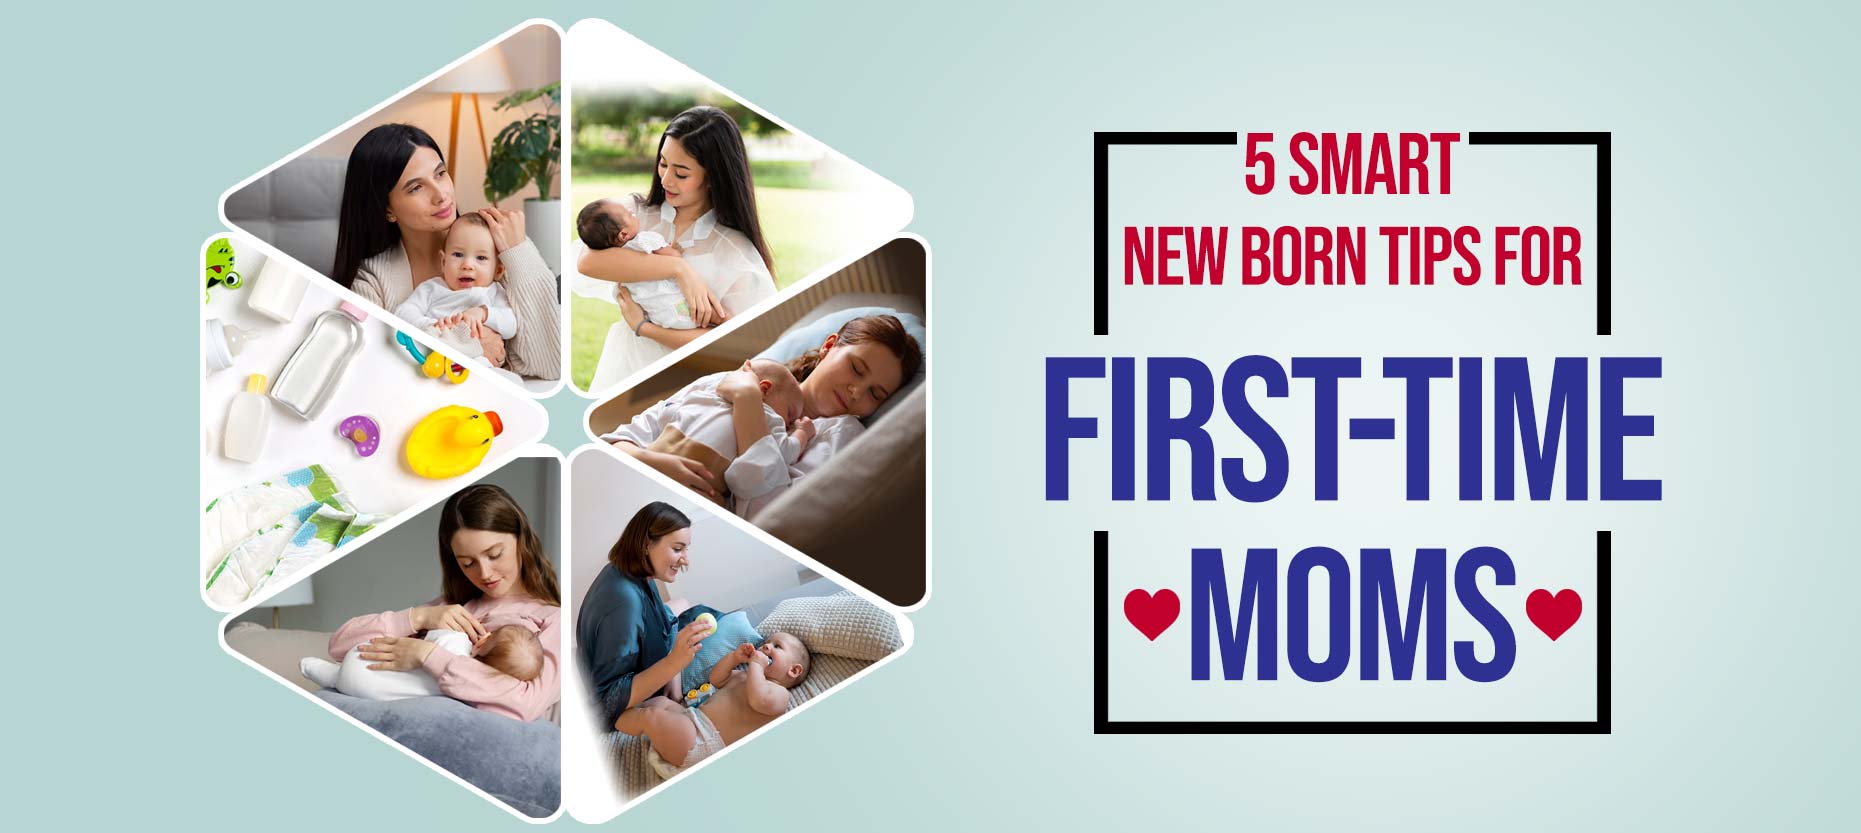 5 Smart Newborn Tips for First Time Moms